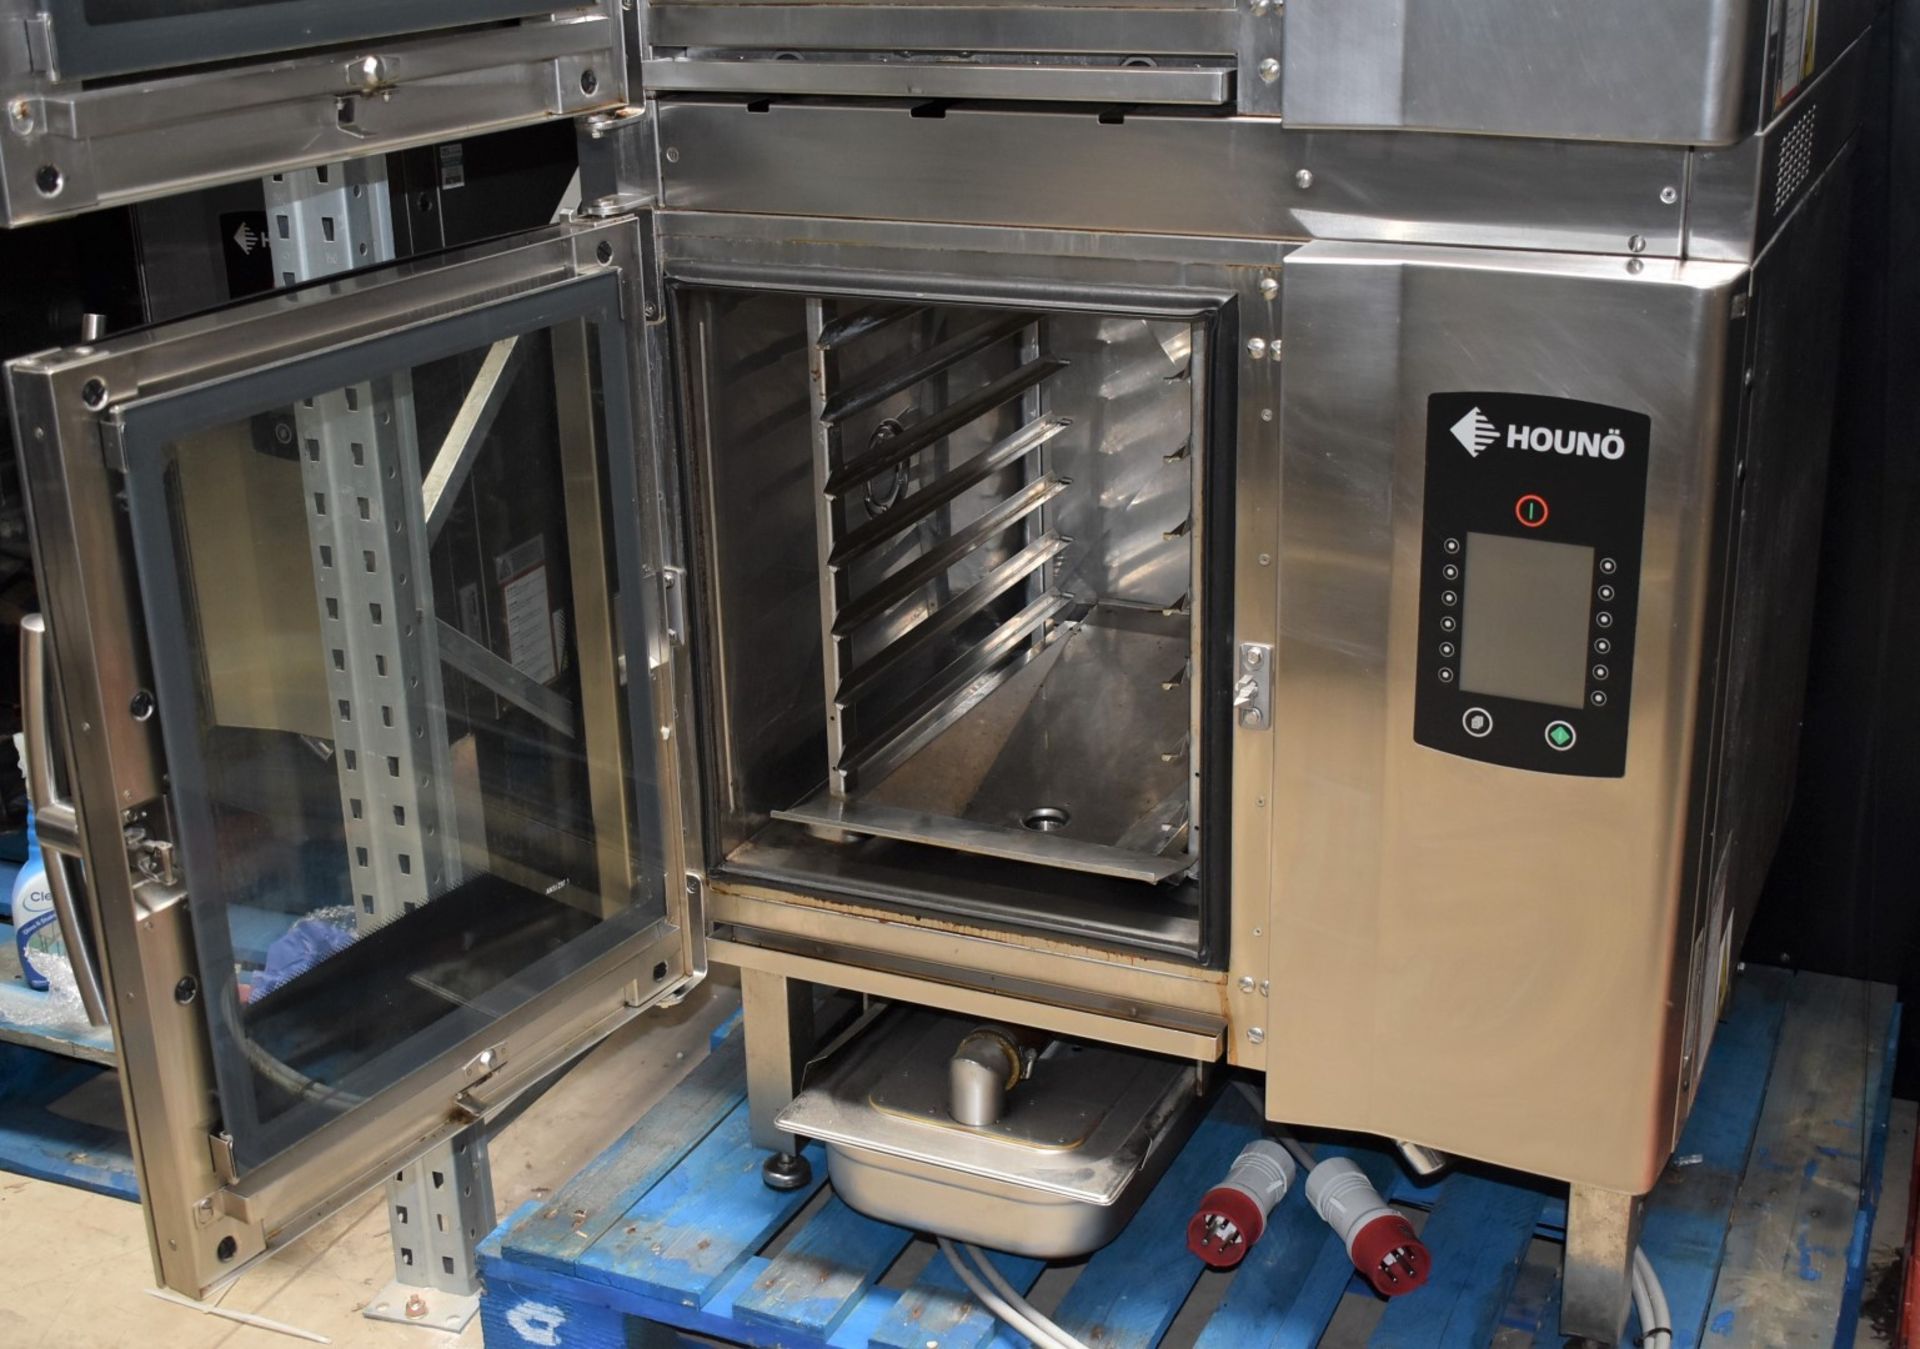 1 x Houno Double 6 Grid Stacked Combi Oven - Model: C 1.06 / CPE 1.06 - 3 Phase - Image 8 of 21